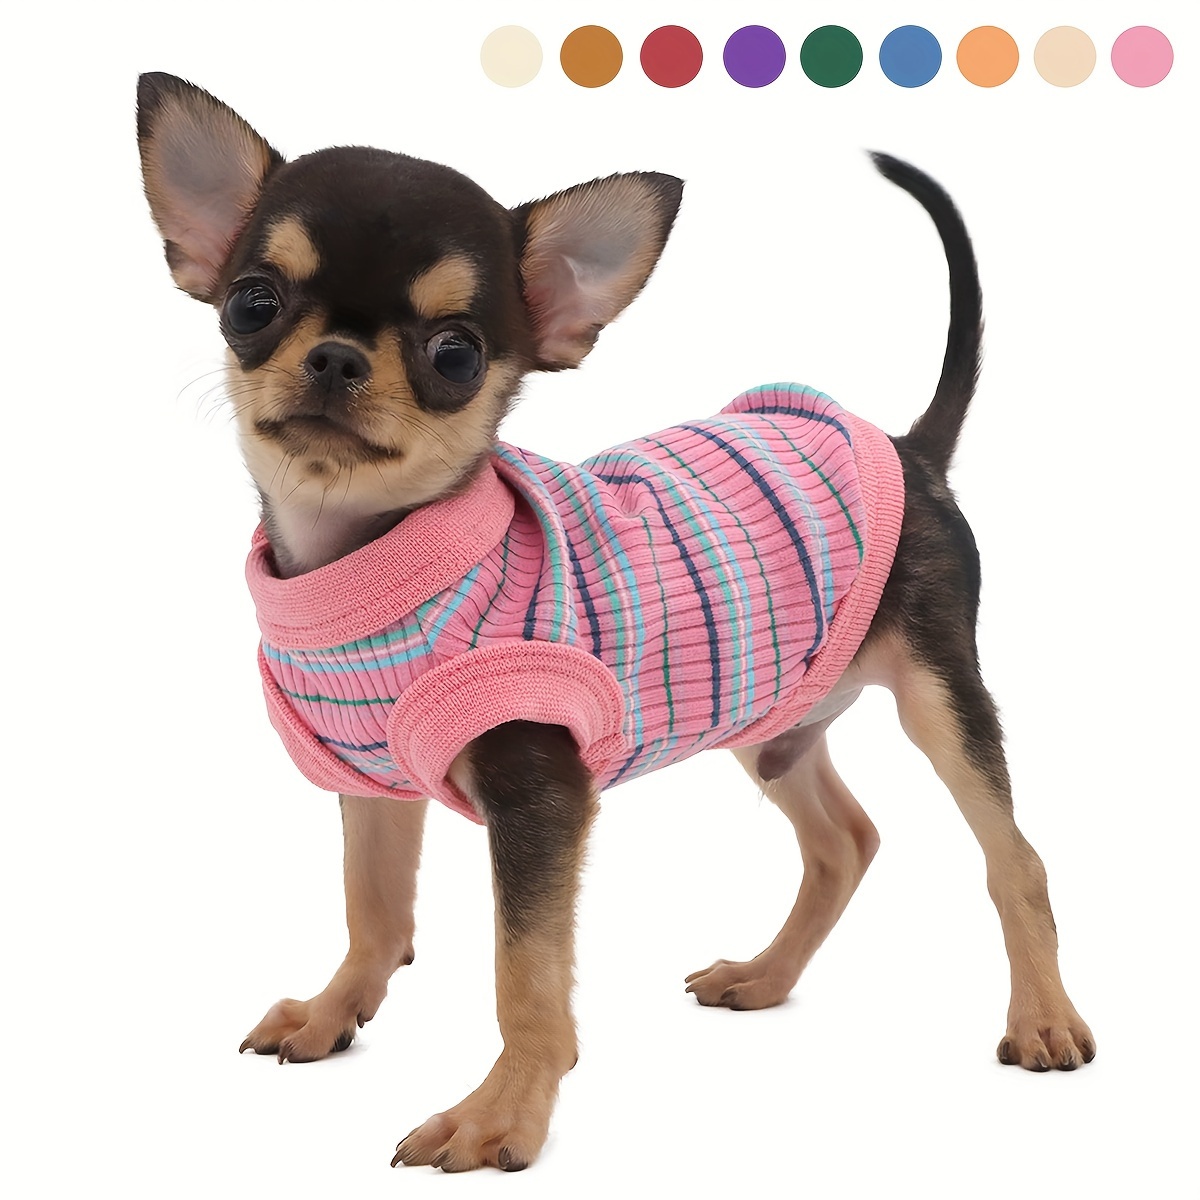 5 Pieces Cute Dog Dress Summer PET Puppy Clothes Soft and